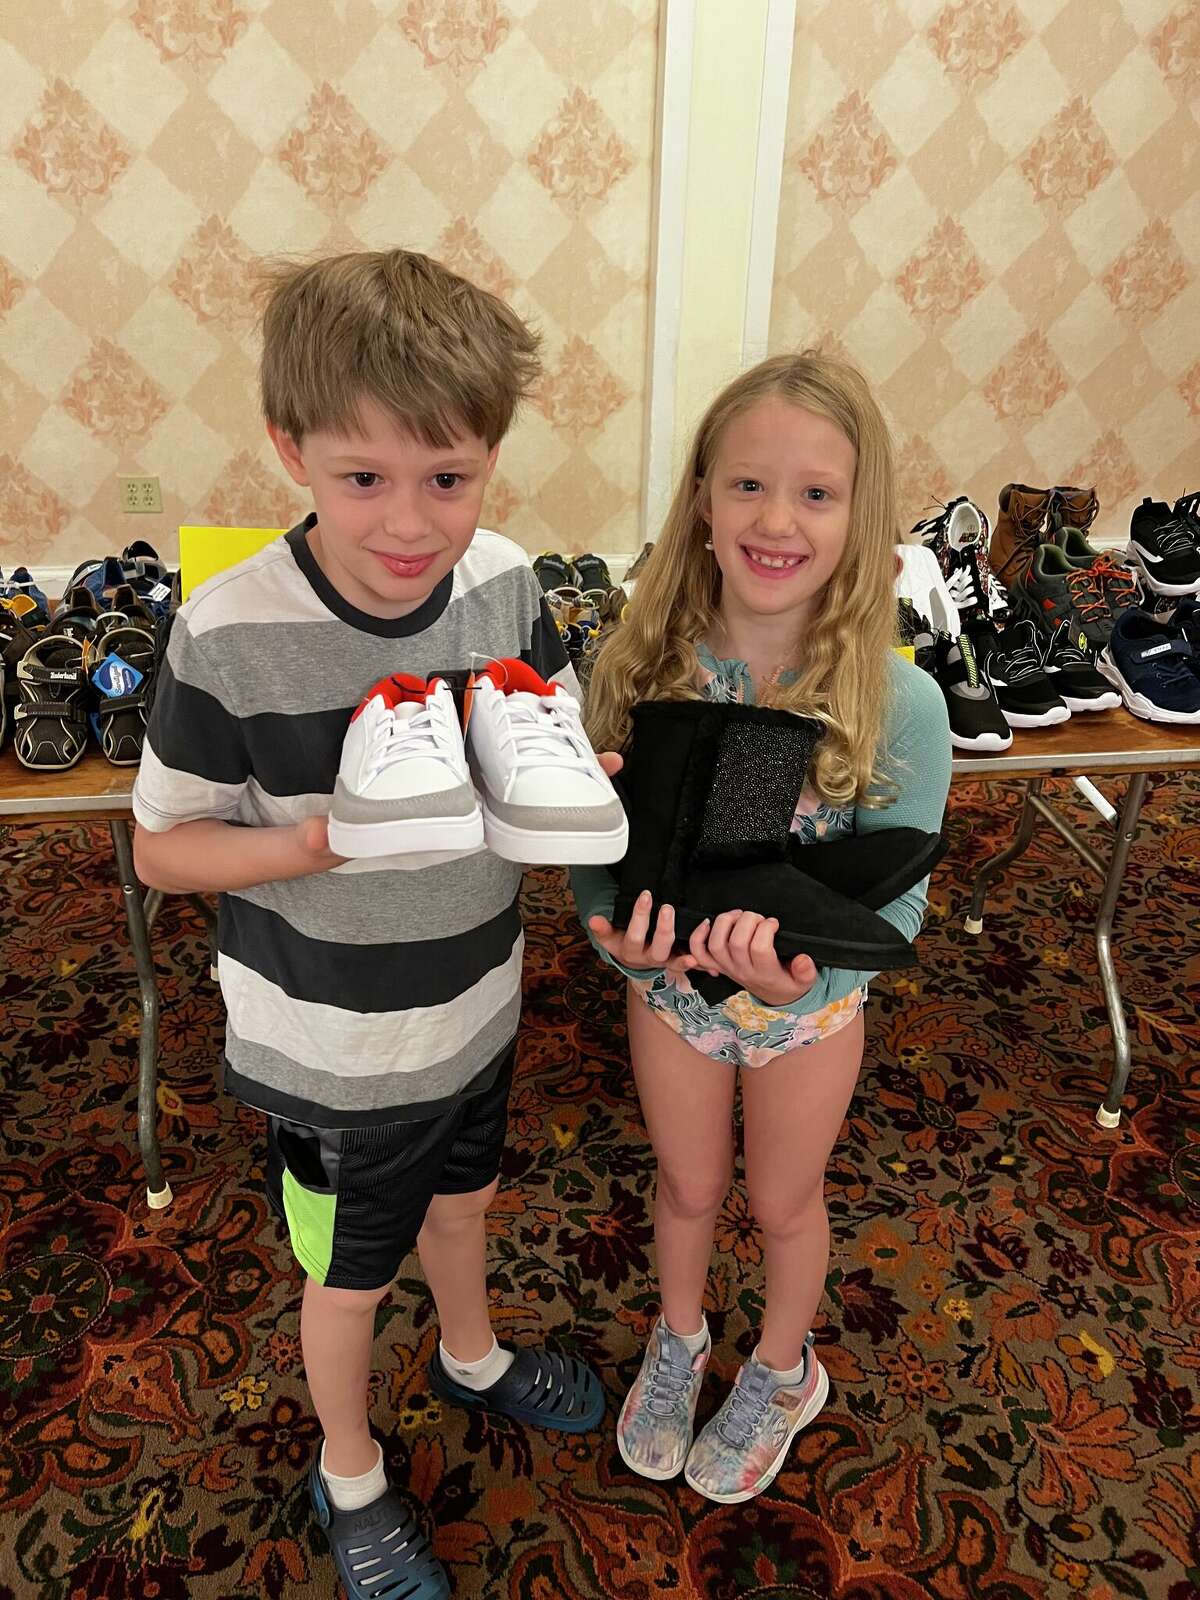 Friendly Hands Food Bank in Torrington gave away more than 500 pairs of sneakers and shoes Sept. 17 to local children, during an event at the Torrington Elks Lodge. 